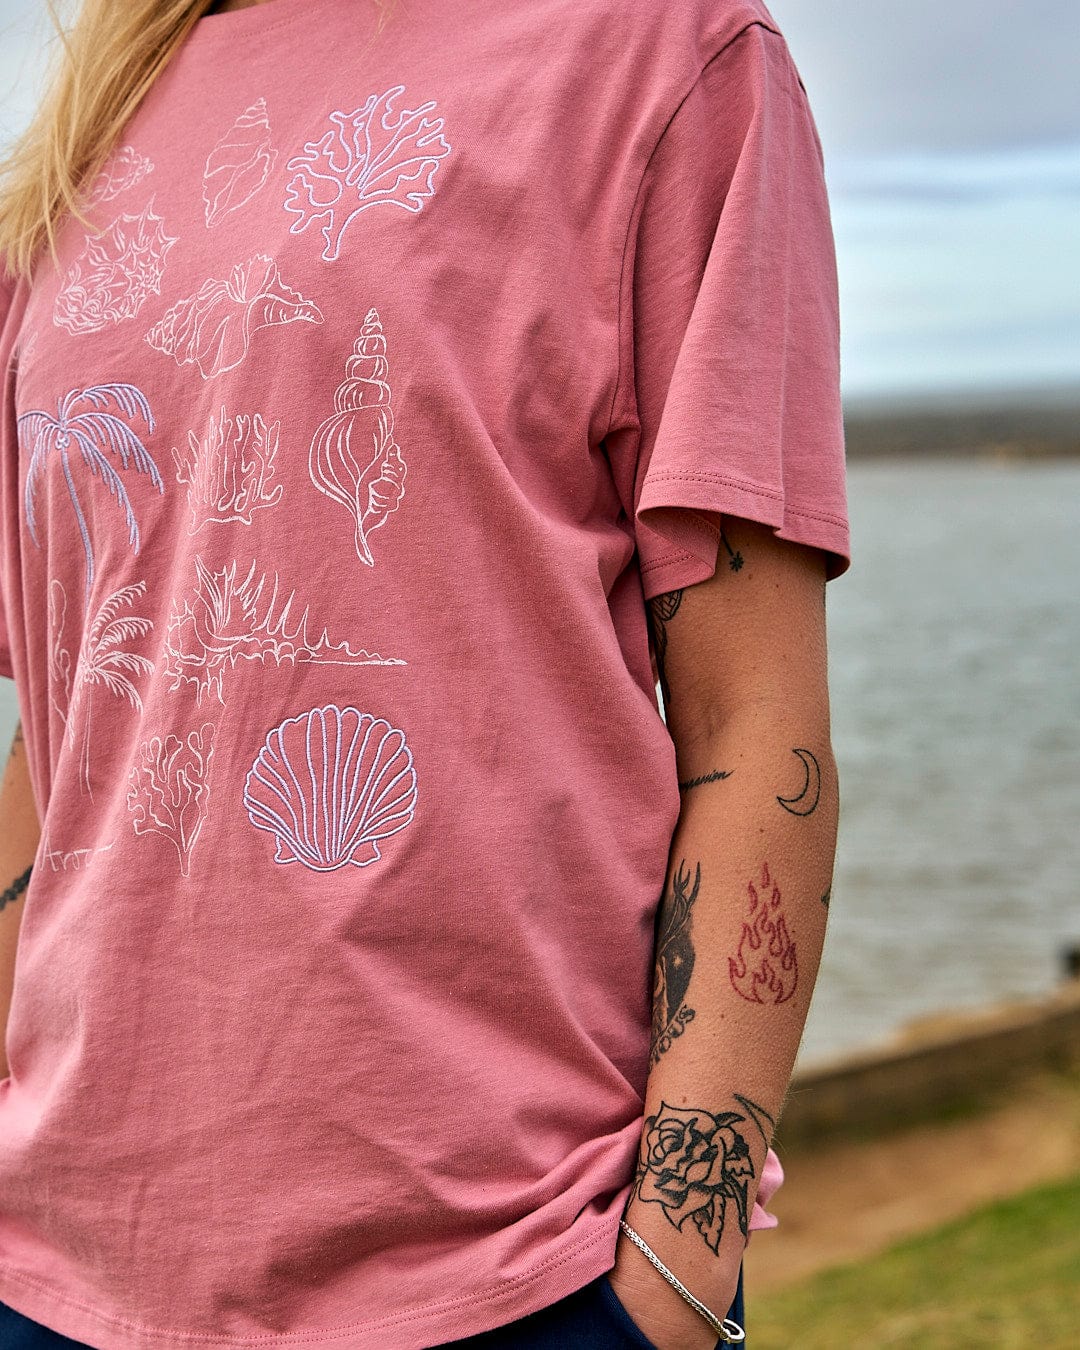 A woman wearing a Saltrock Sea Shells - Womens Relaxed Fit T-Shirt - Mid Pink near the water.